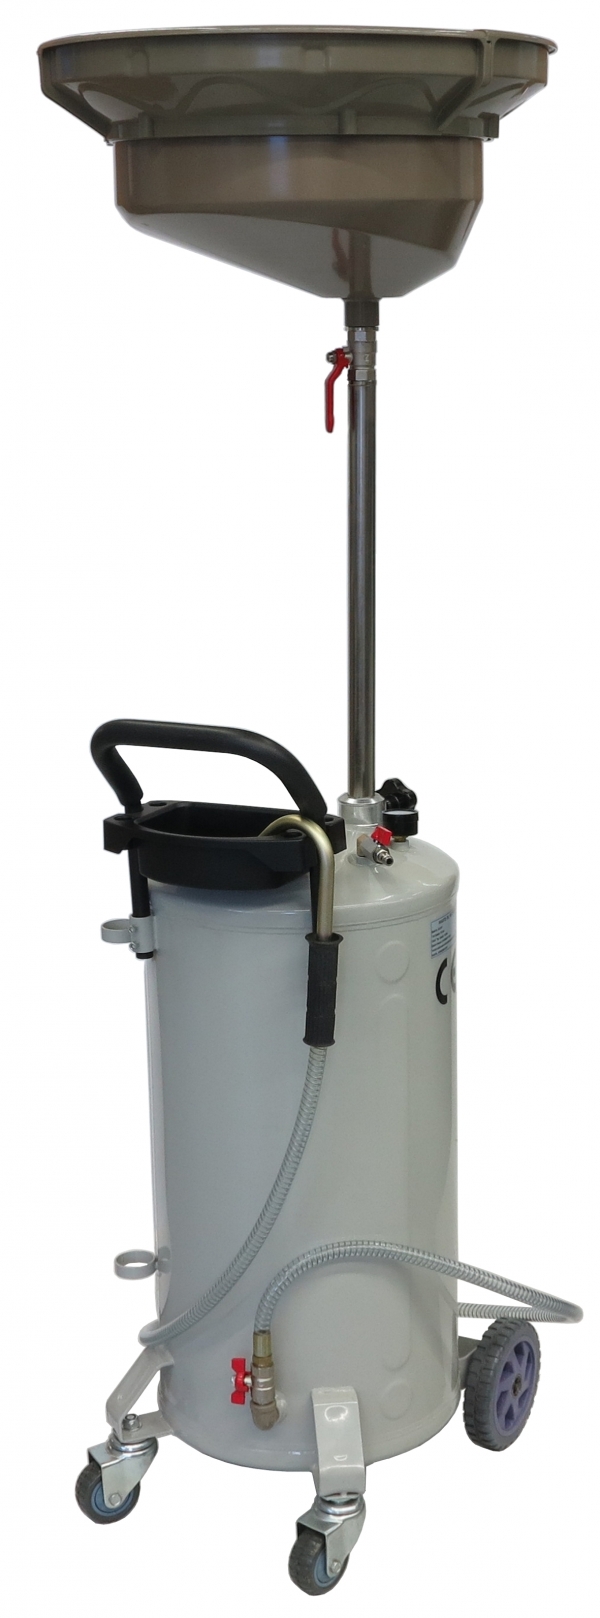 Waste oil drainer 75l mobile with air pressure discharge